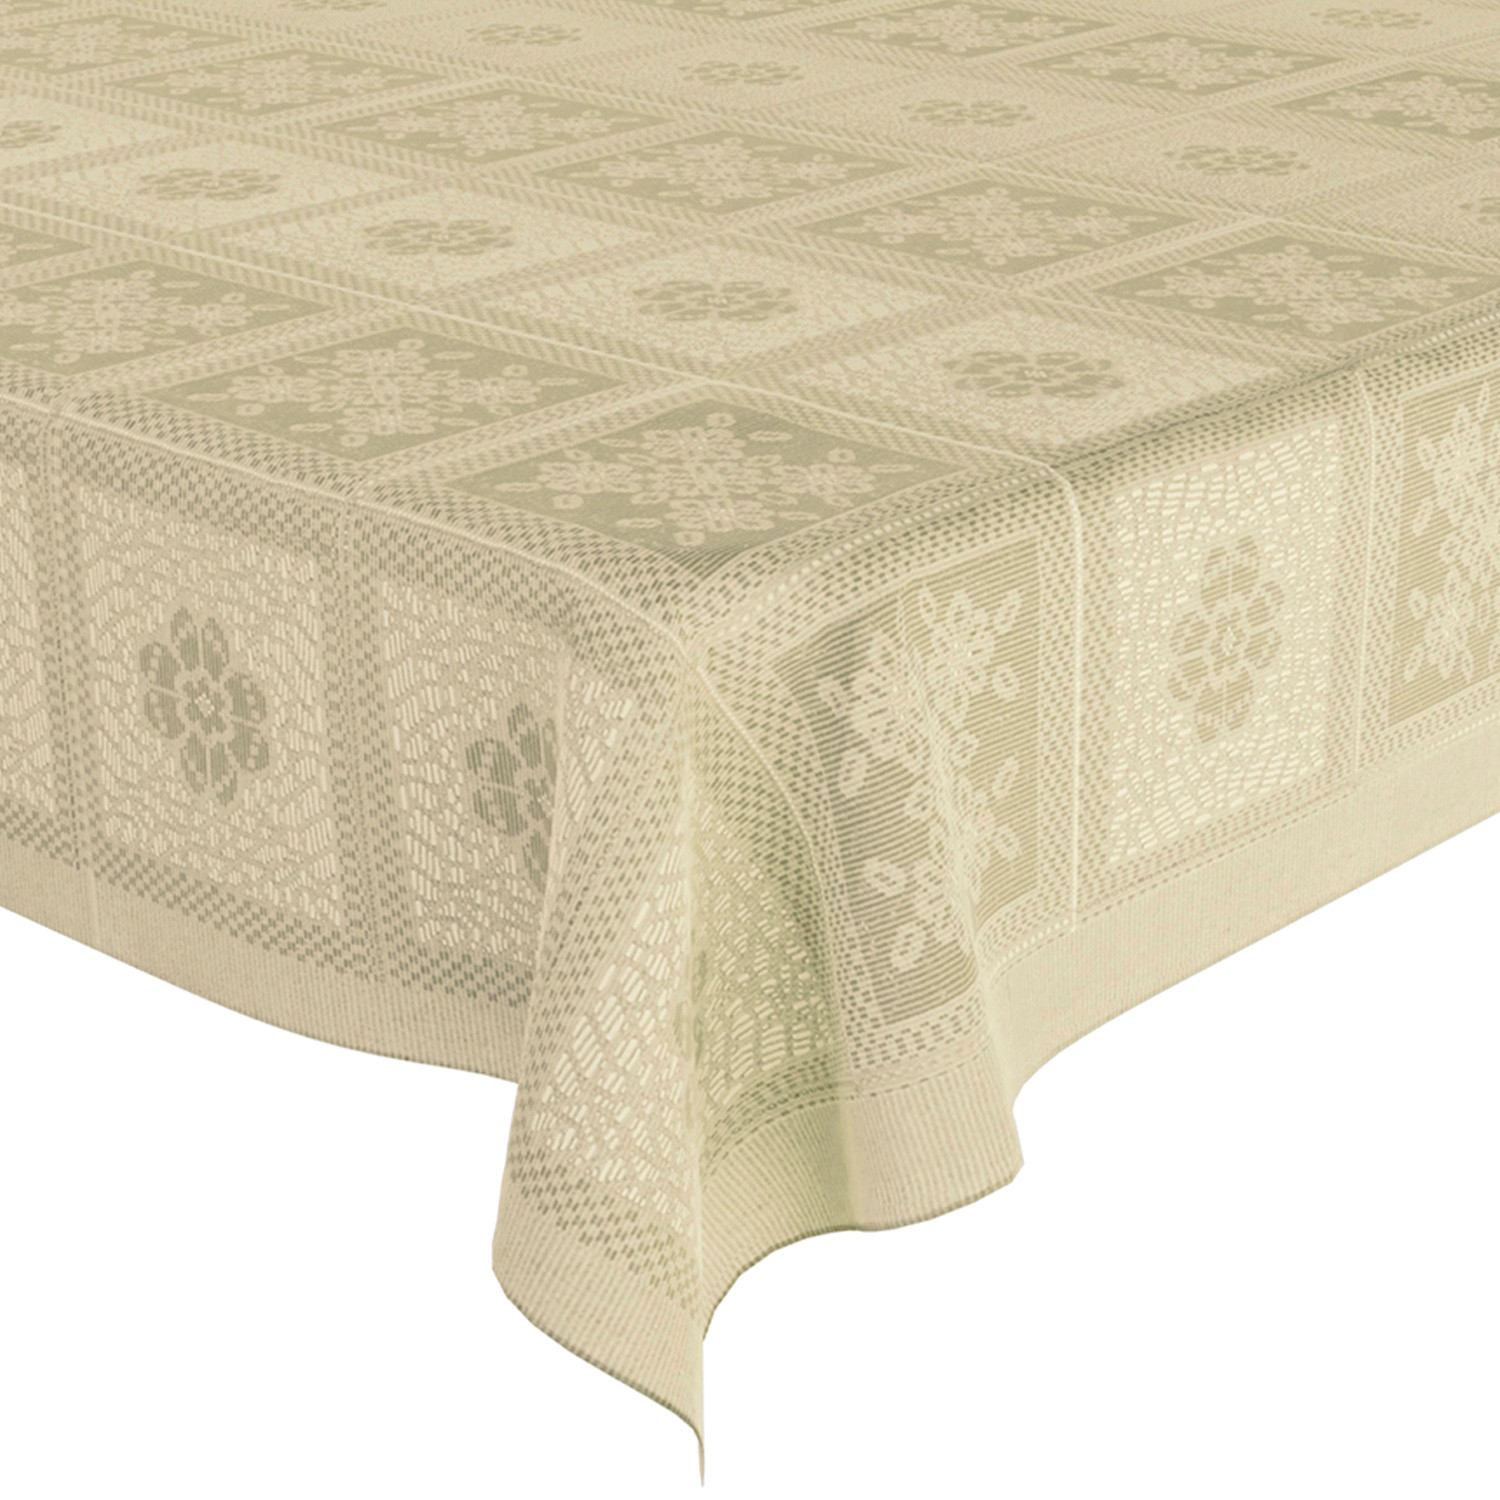 Kuber Industries Dining Table Cover | Cotton Net Square Flower Pattern | Tablecloth for Home Décor | Tablecloth for Dining Area | 60X90 Inch | Cream